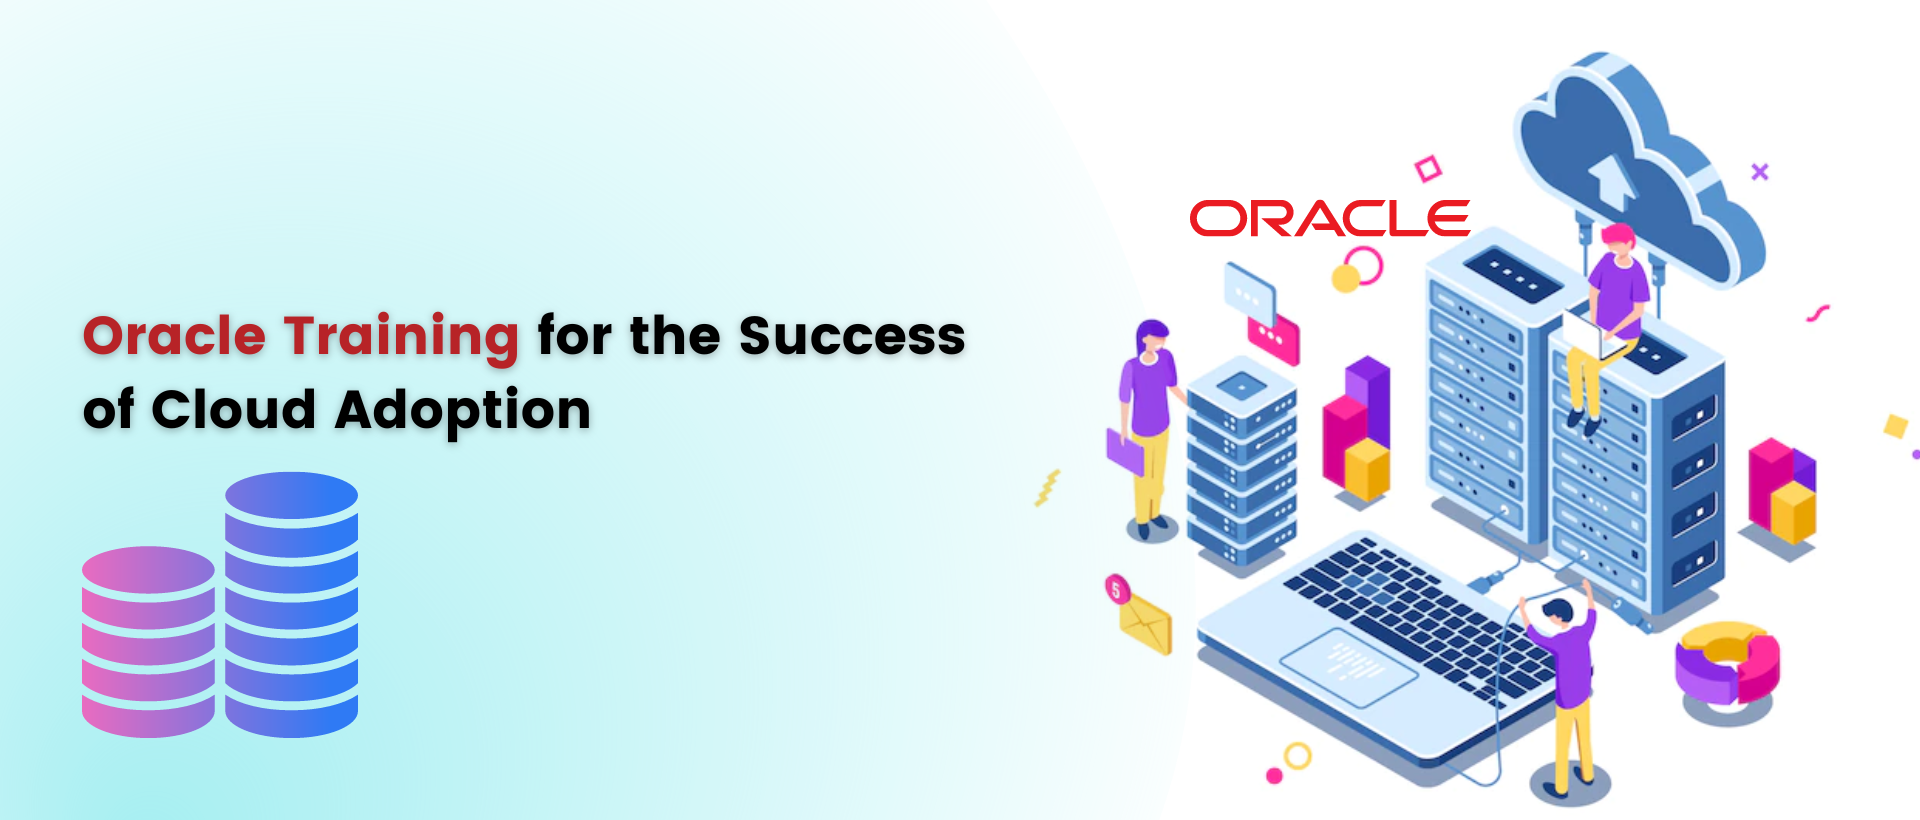 Oracle Training for the Success of Cloud Adoption